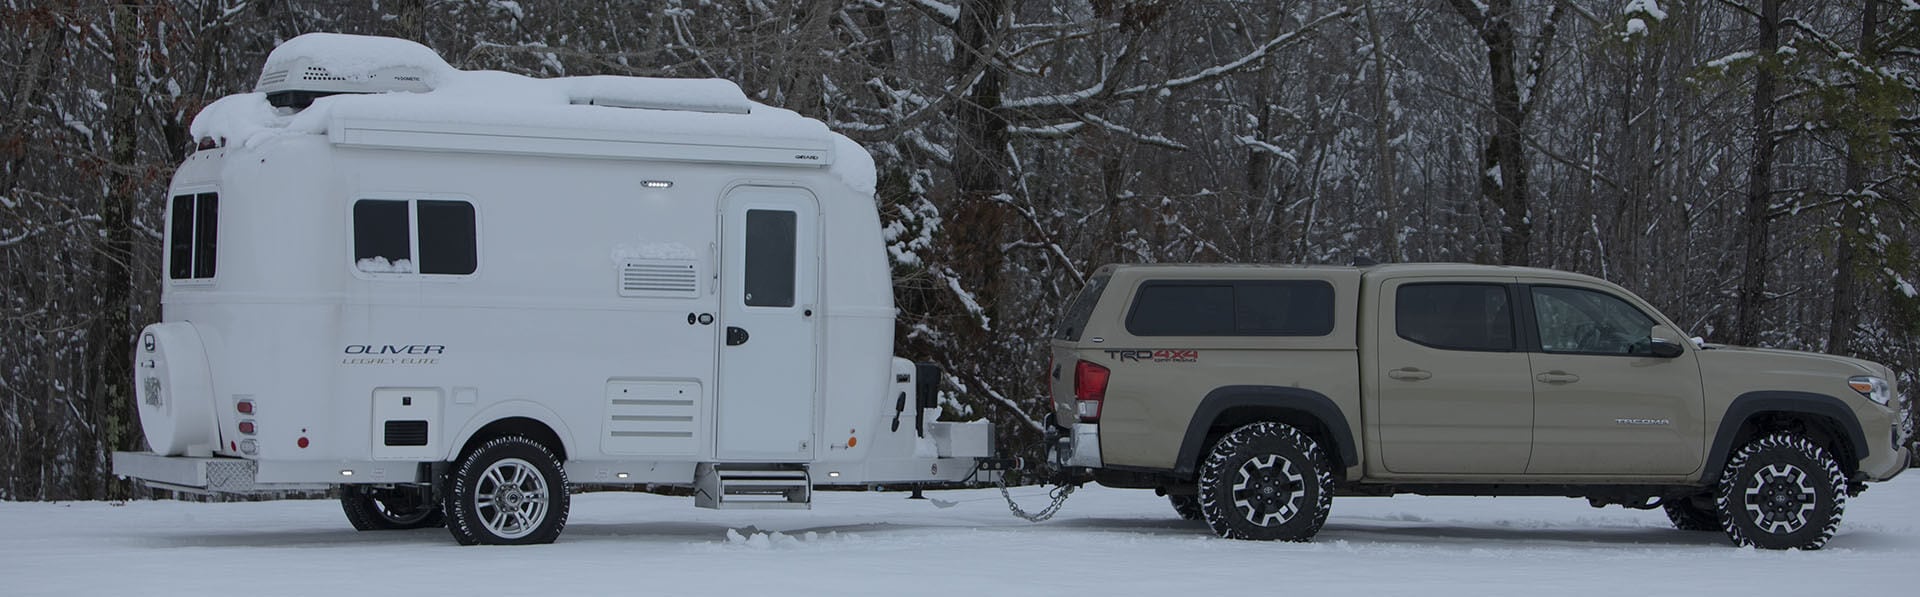 A well-maintained, compact and versatile four-season travel trailer parked in a picturesque camping spot.